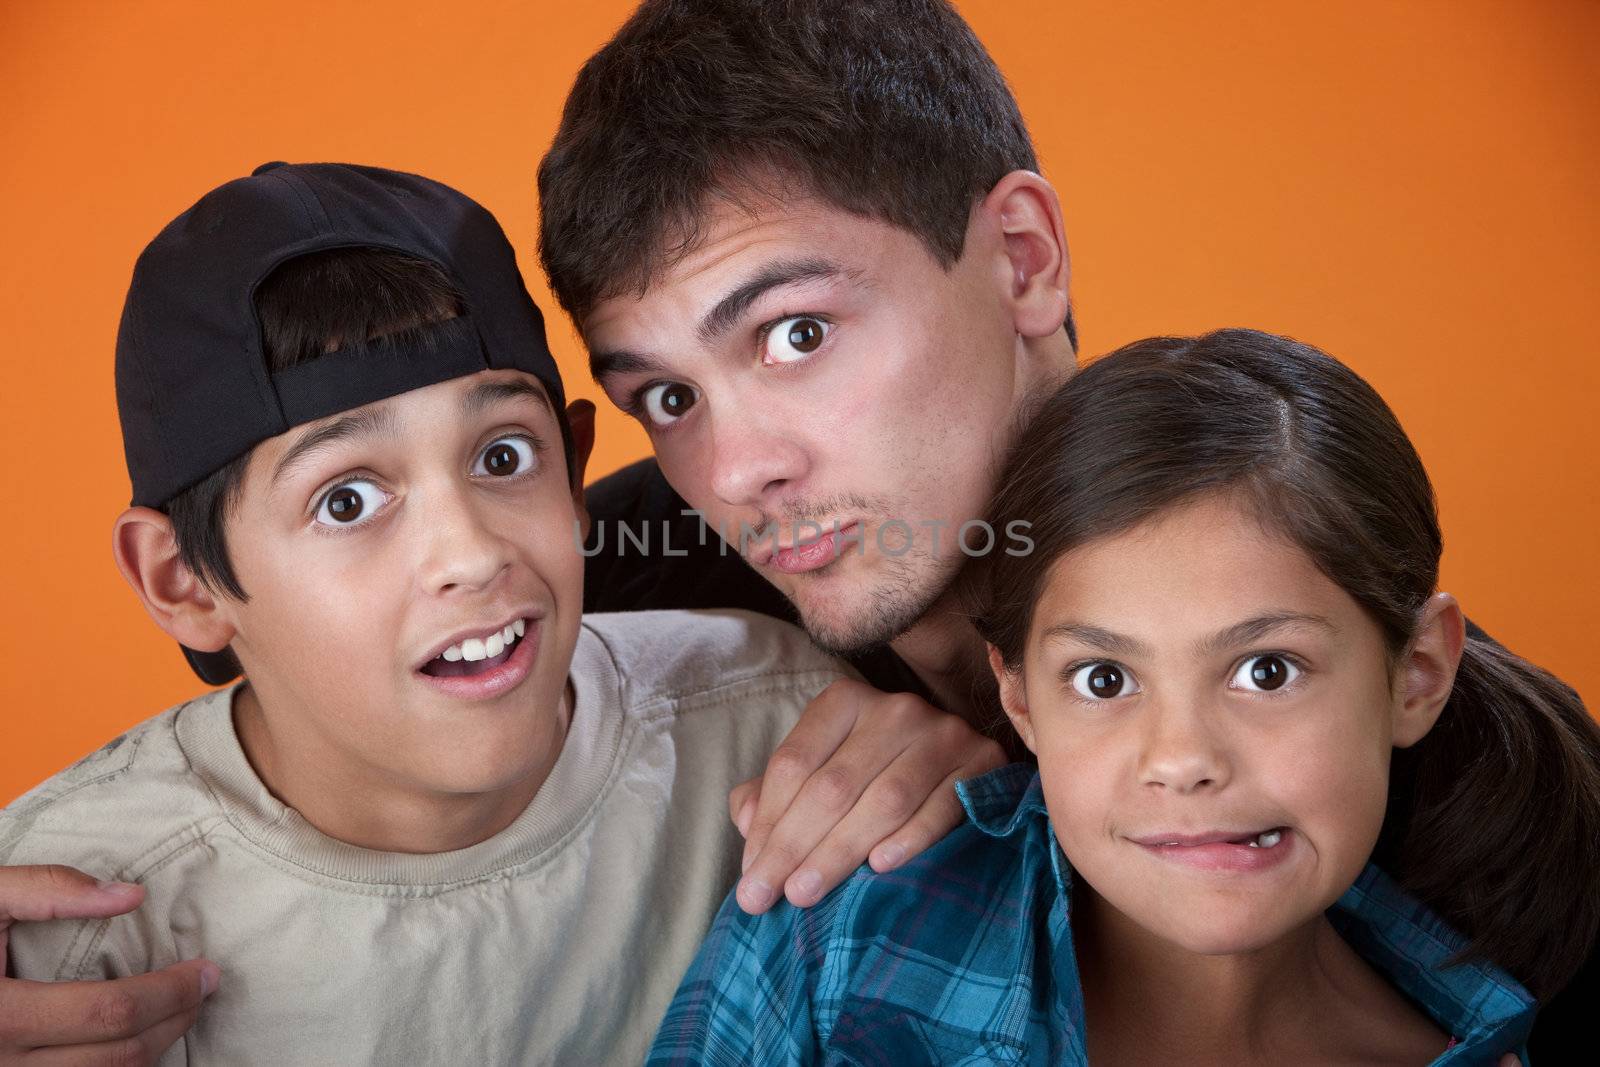 Elder brother with two younger siblings making faces